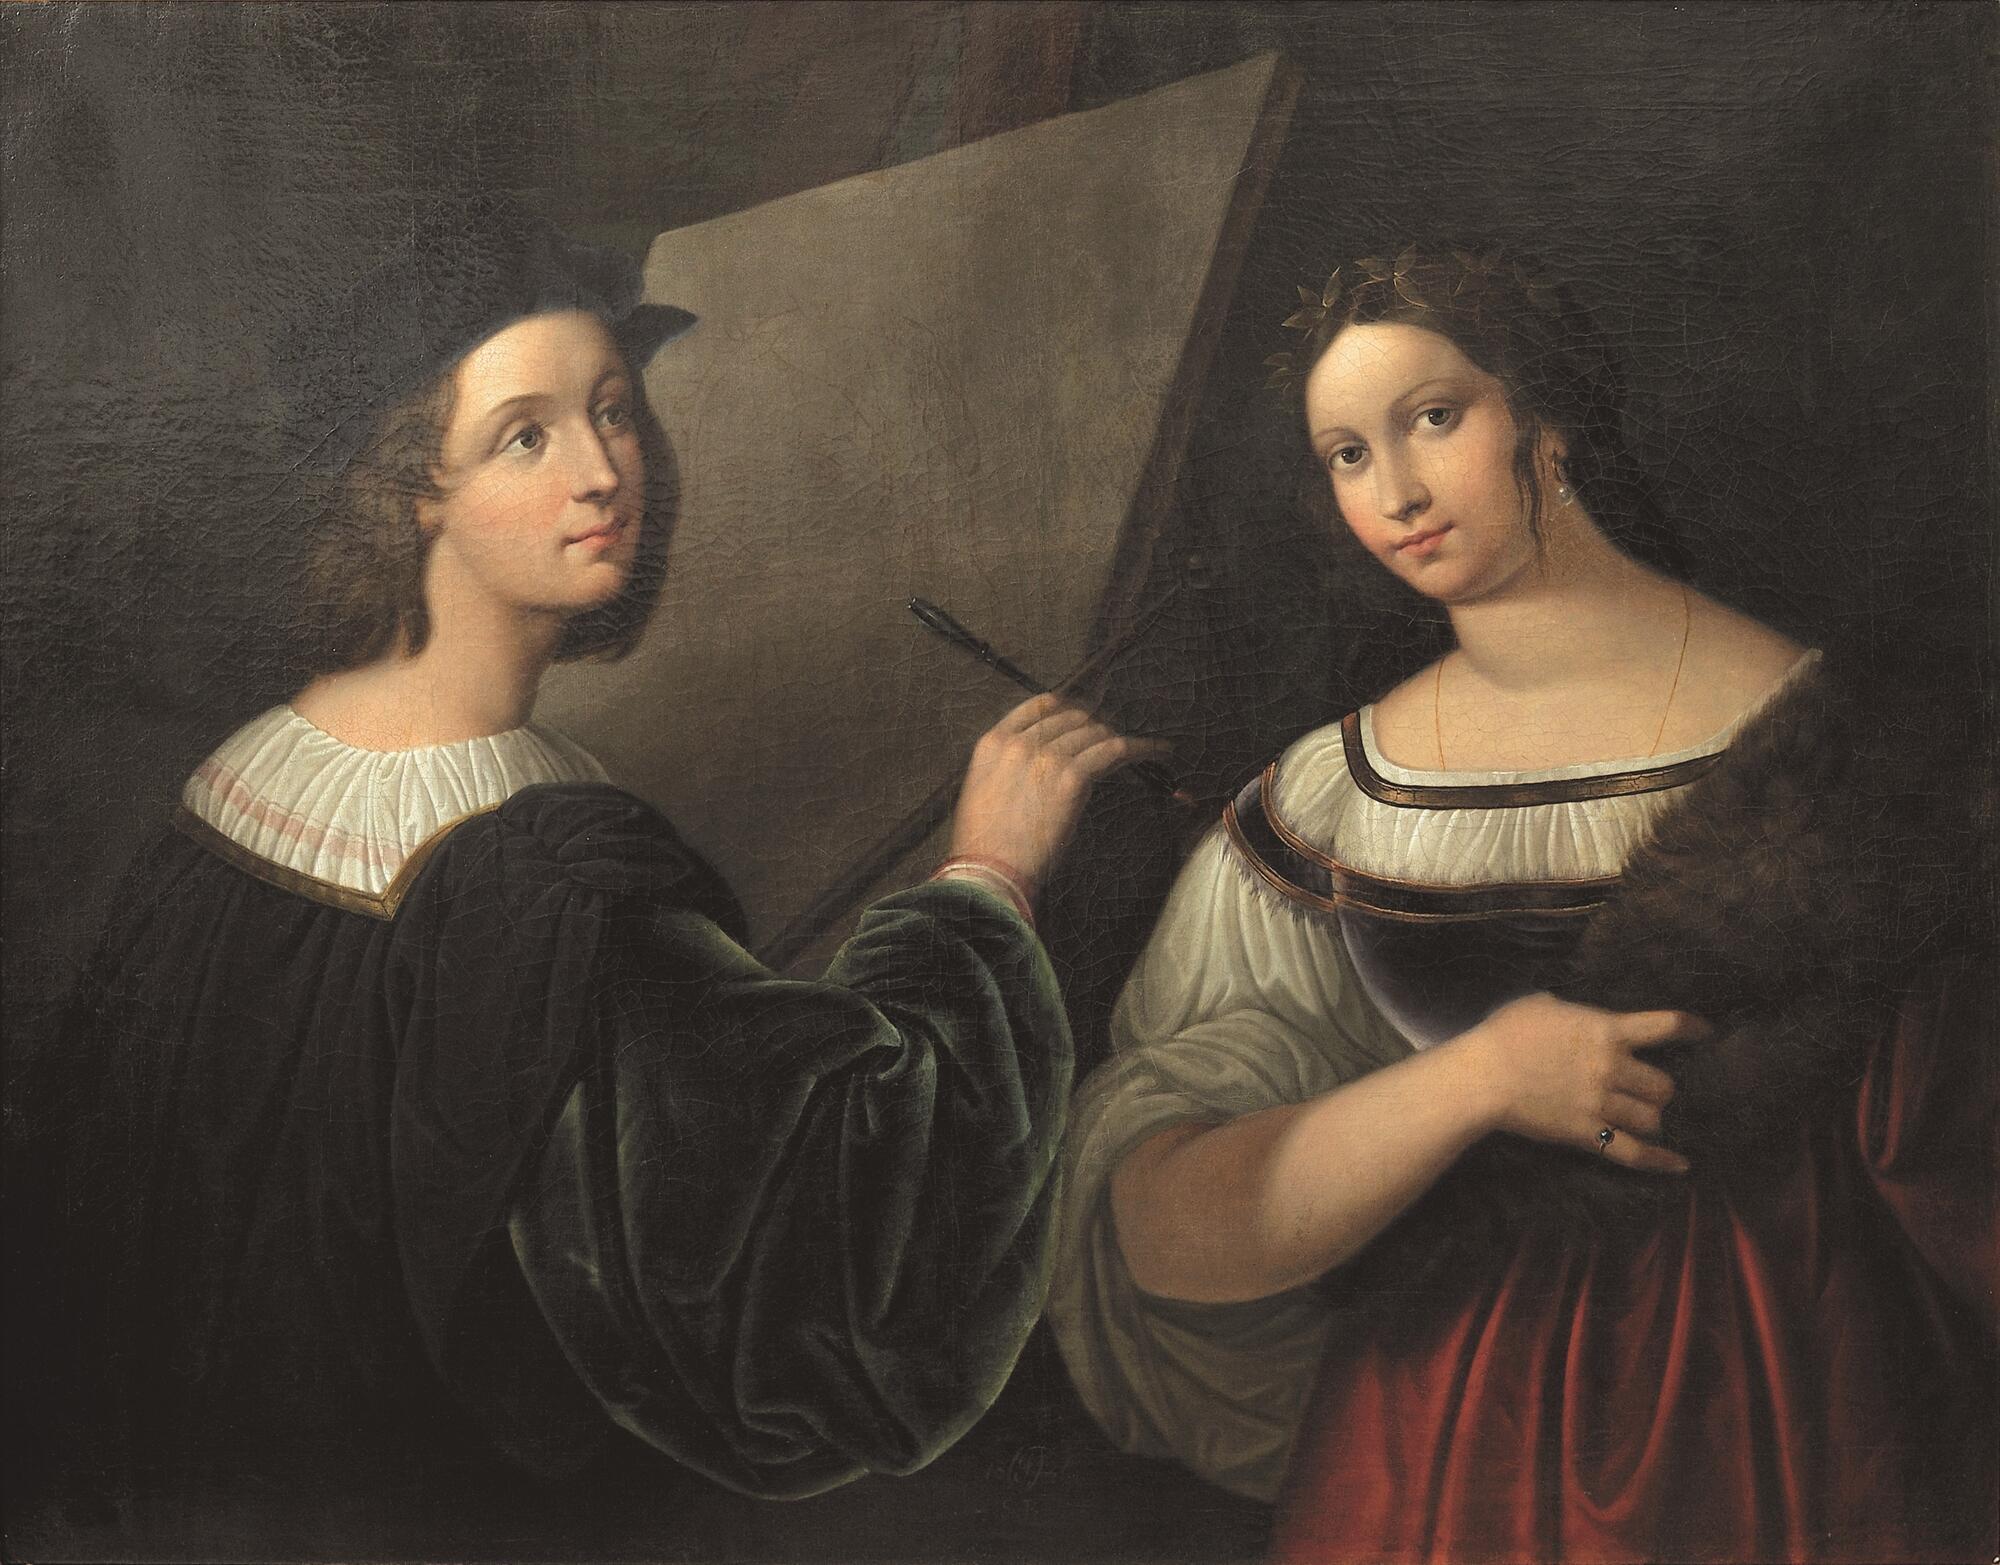 Raphael and the Fornarina